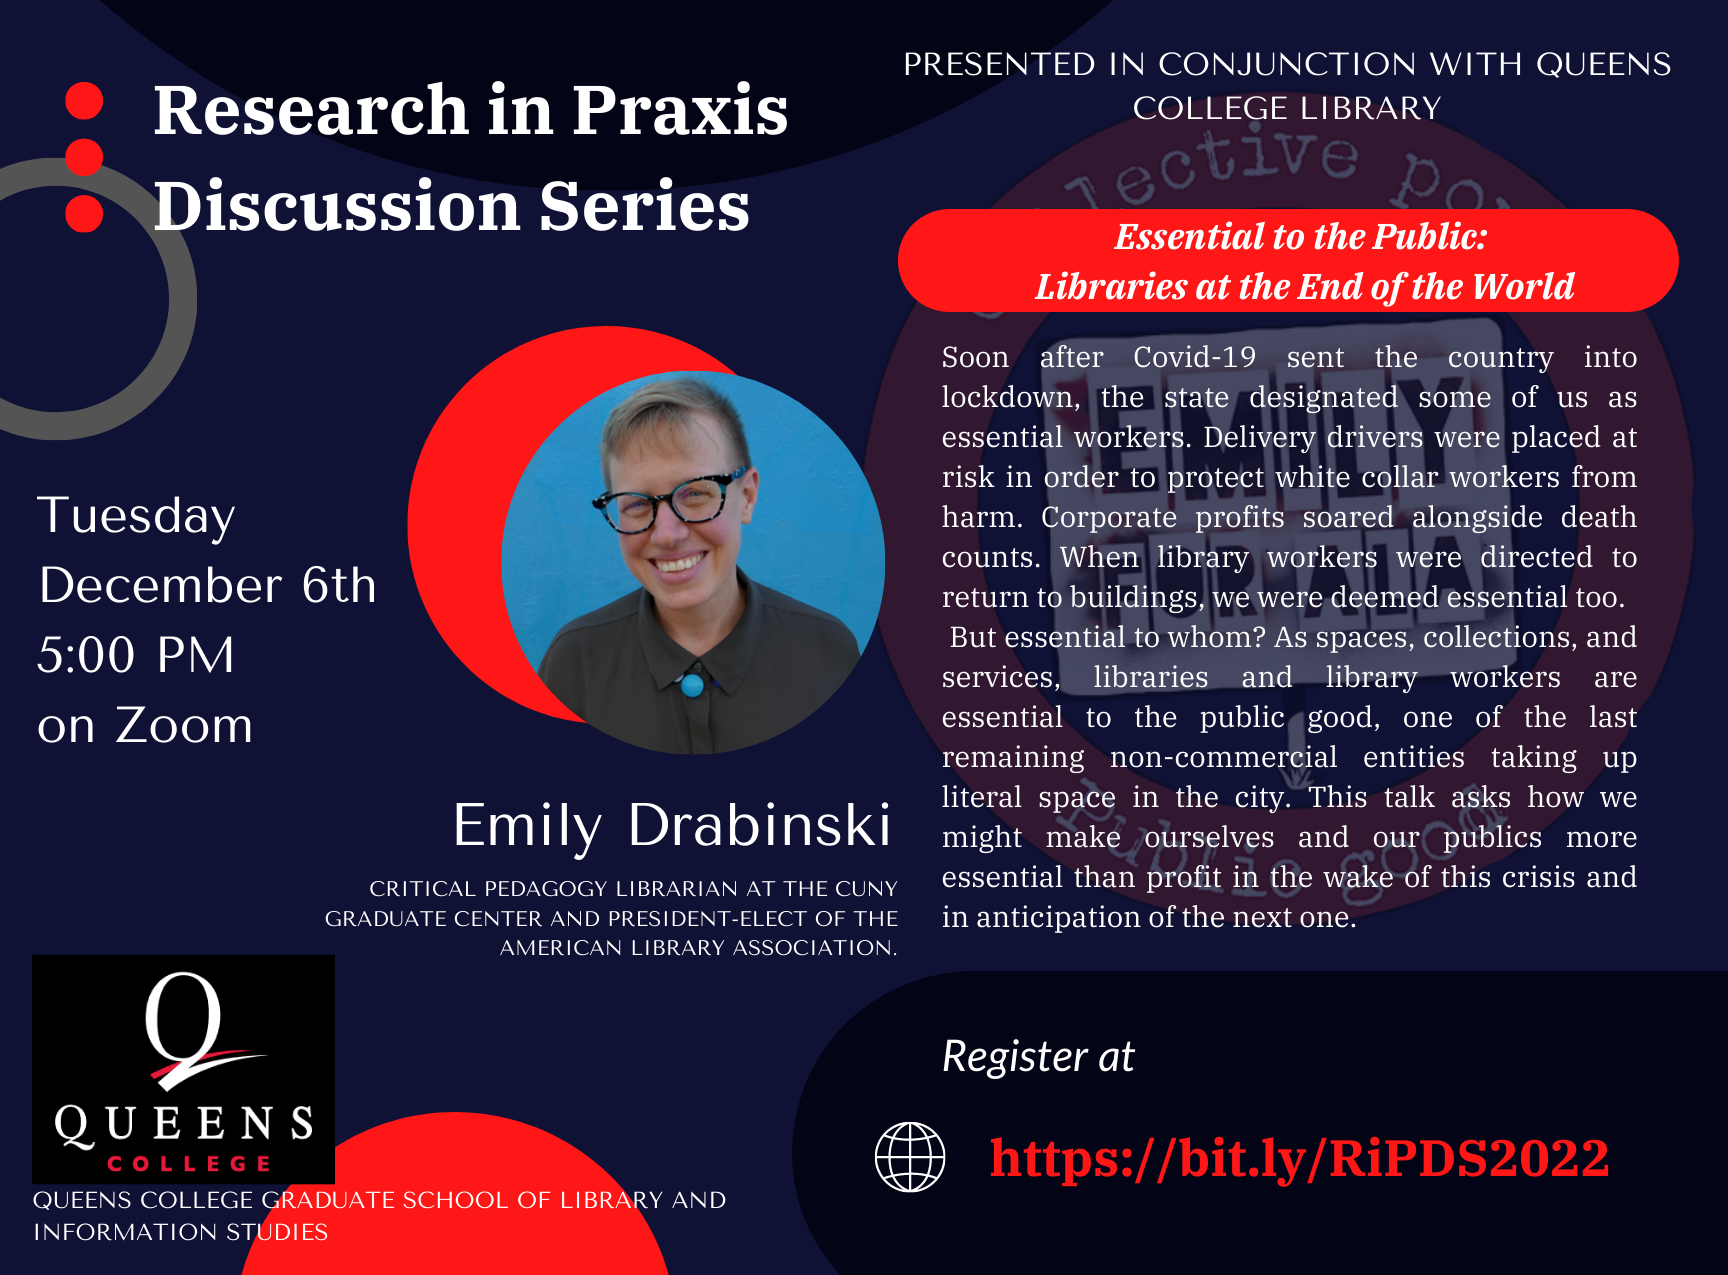 Upcoming Event: Research in Praxis Discussion Series with Emily Drabinksi